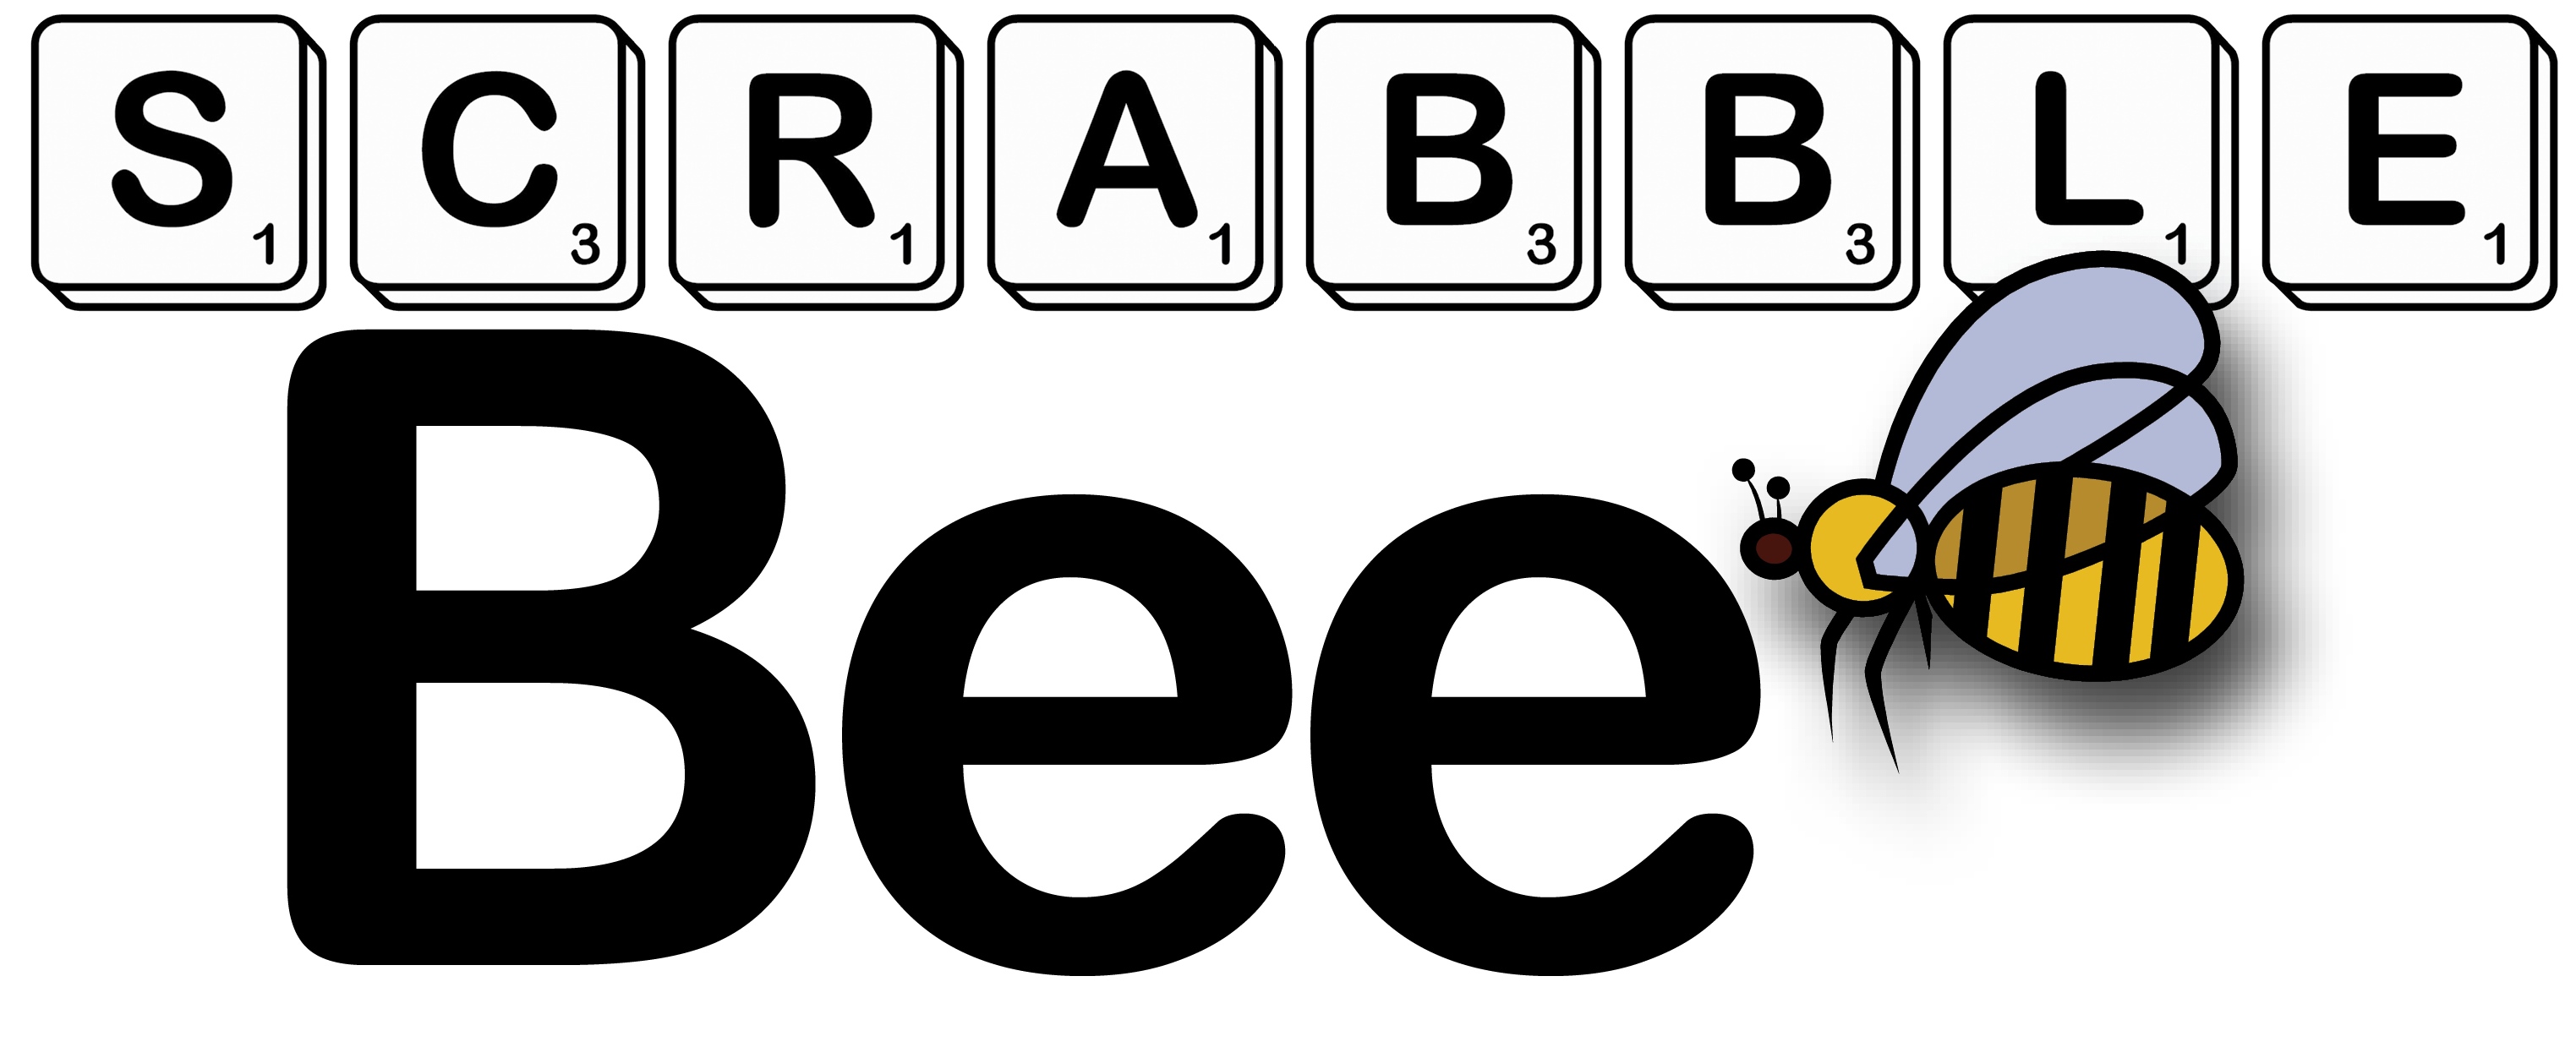 Teams, get ready for Oct 9 Scrabble Bee